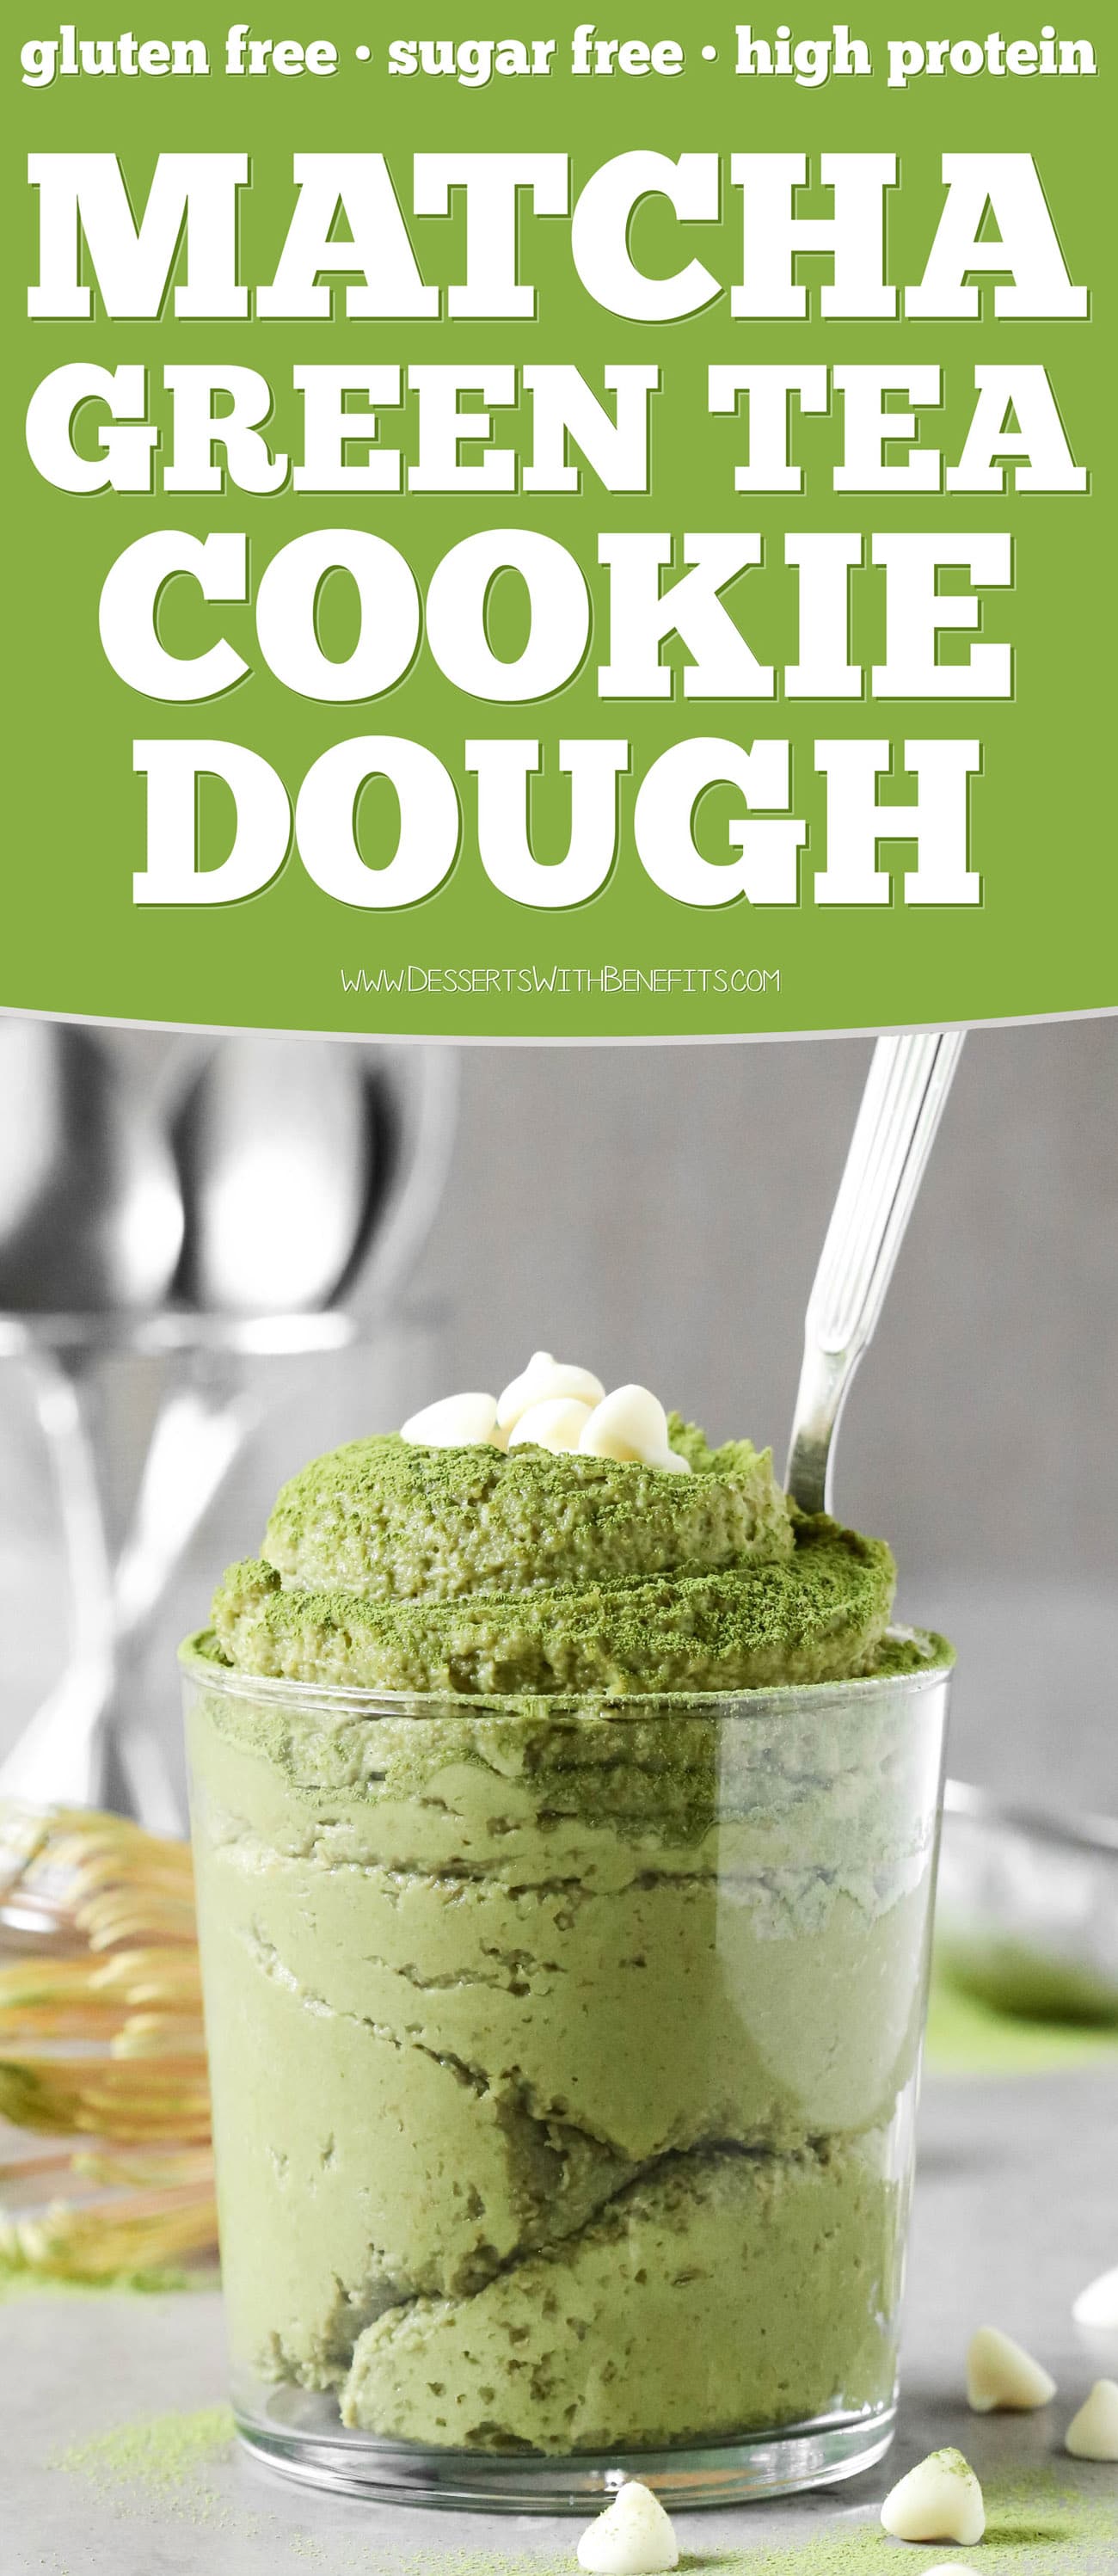 This Matcha Green Tea Cookie Dough is fudgy, sweet, and sinful-tasting, yet it's healthy! Made with nut butter, oats, protein powder (optional), and a secret ingredient. You'd never know this is sugar free, gluten free, high protein, and high fiber too!